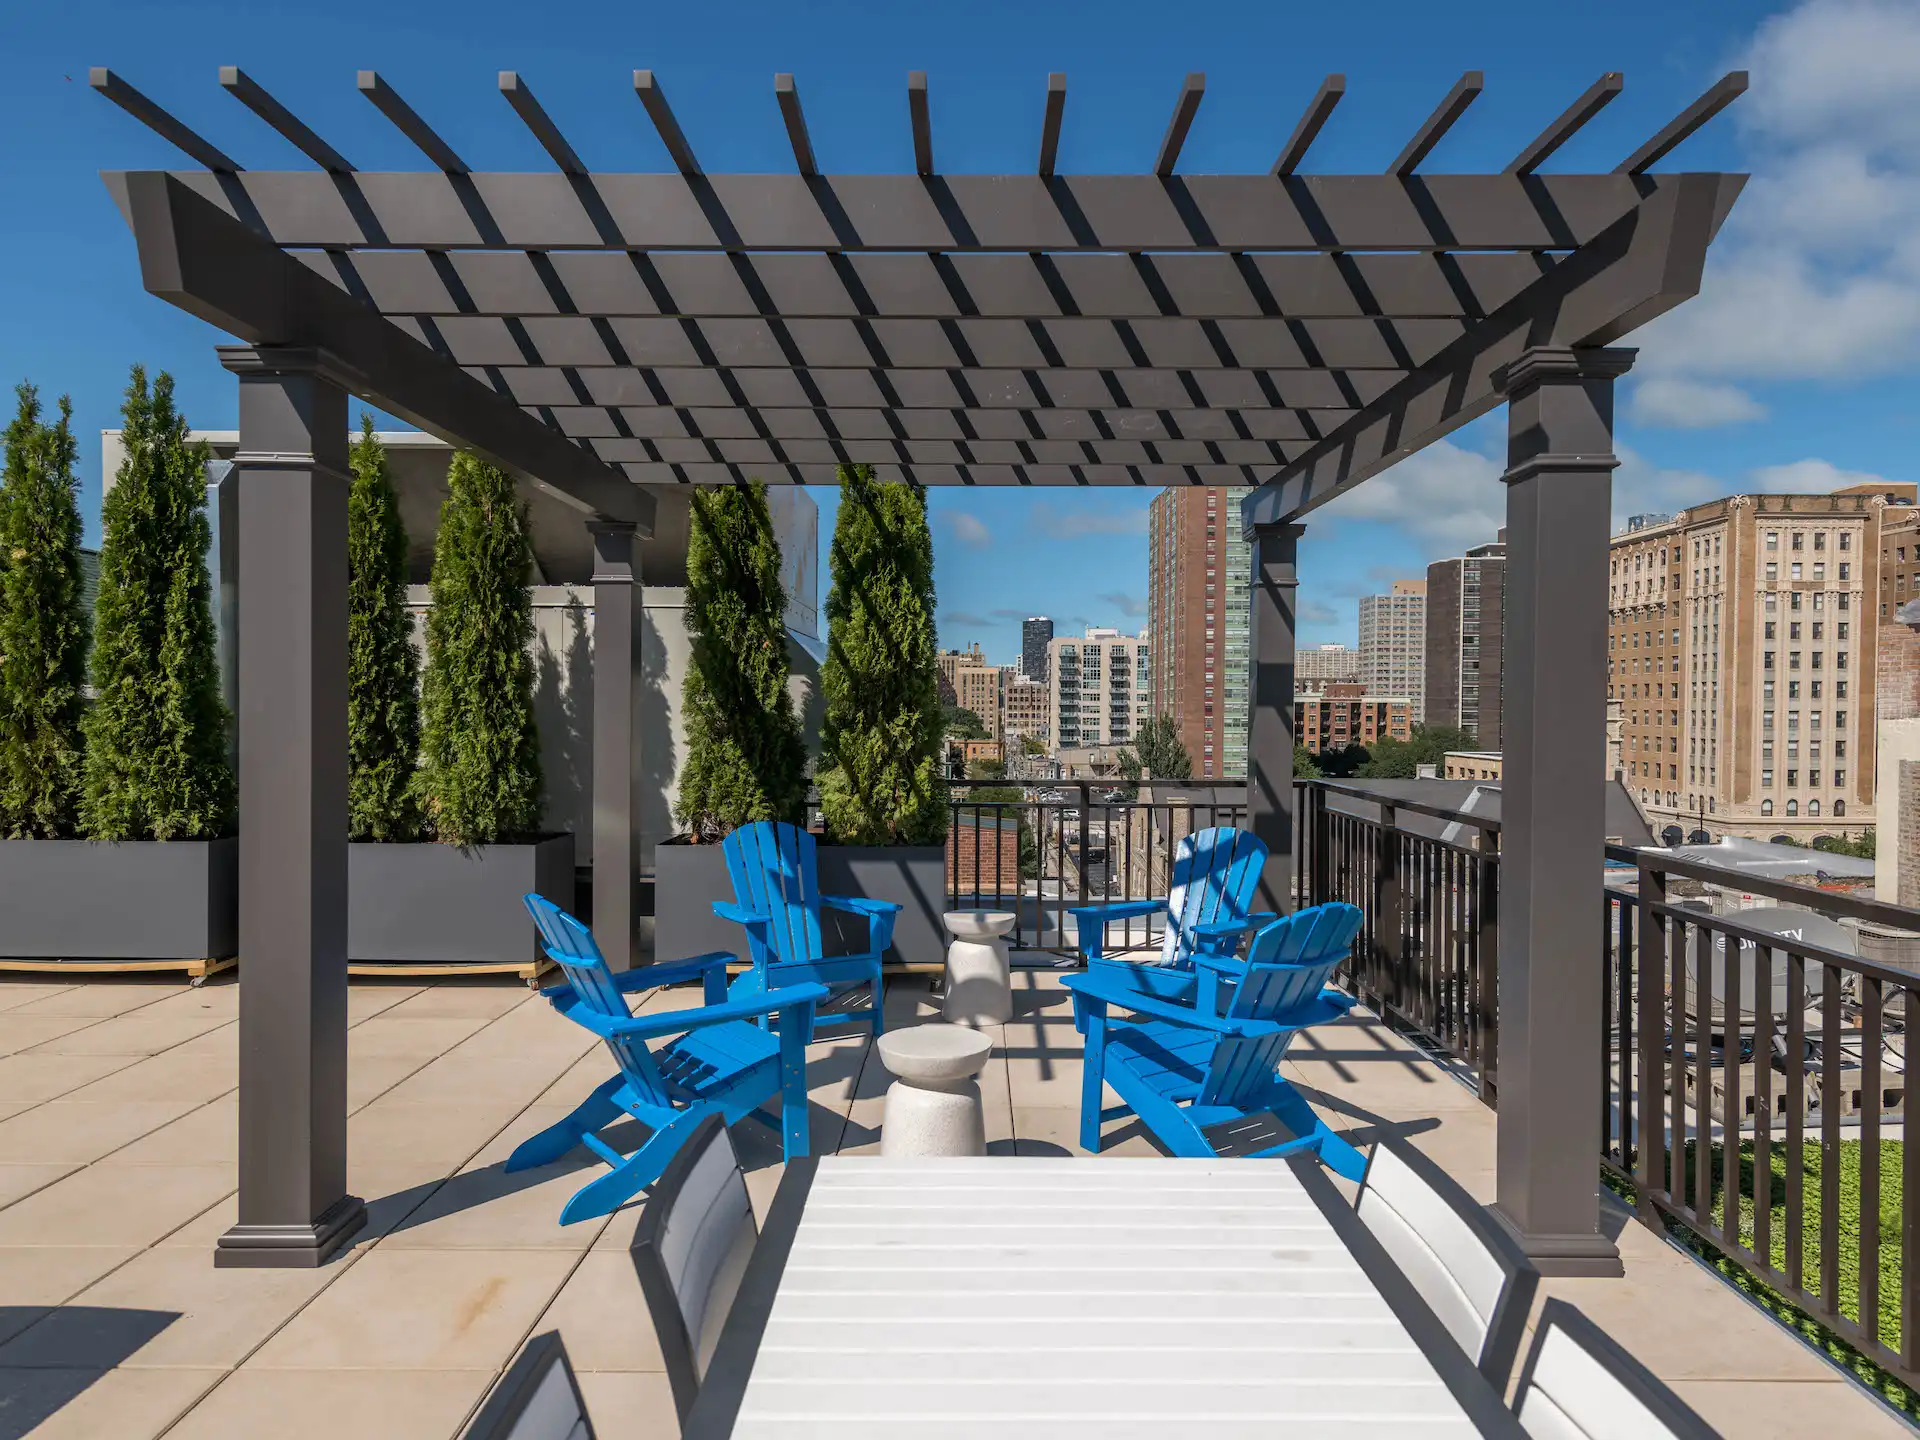 Rooftop patio with pergola and adirondack chairs and trees in planters.